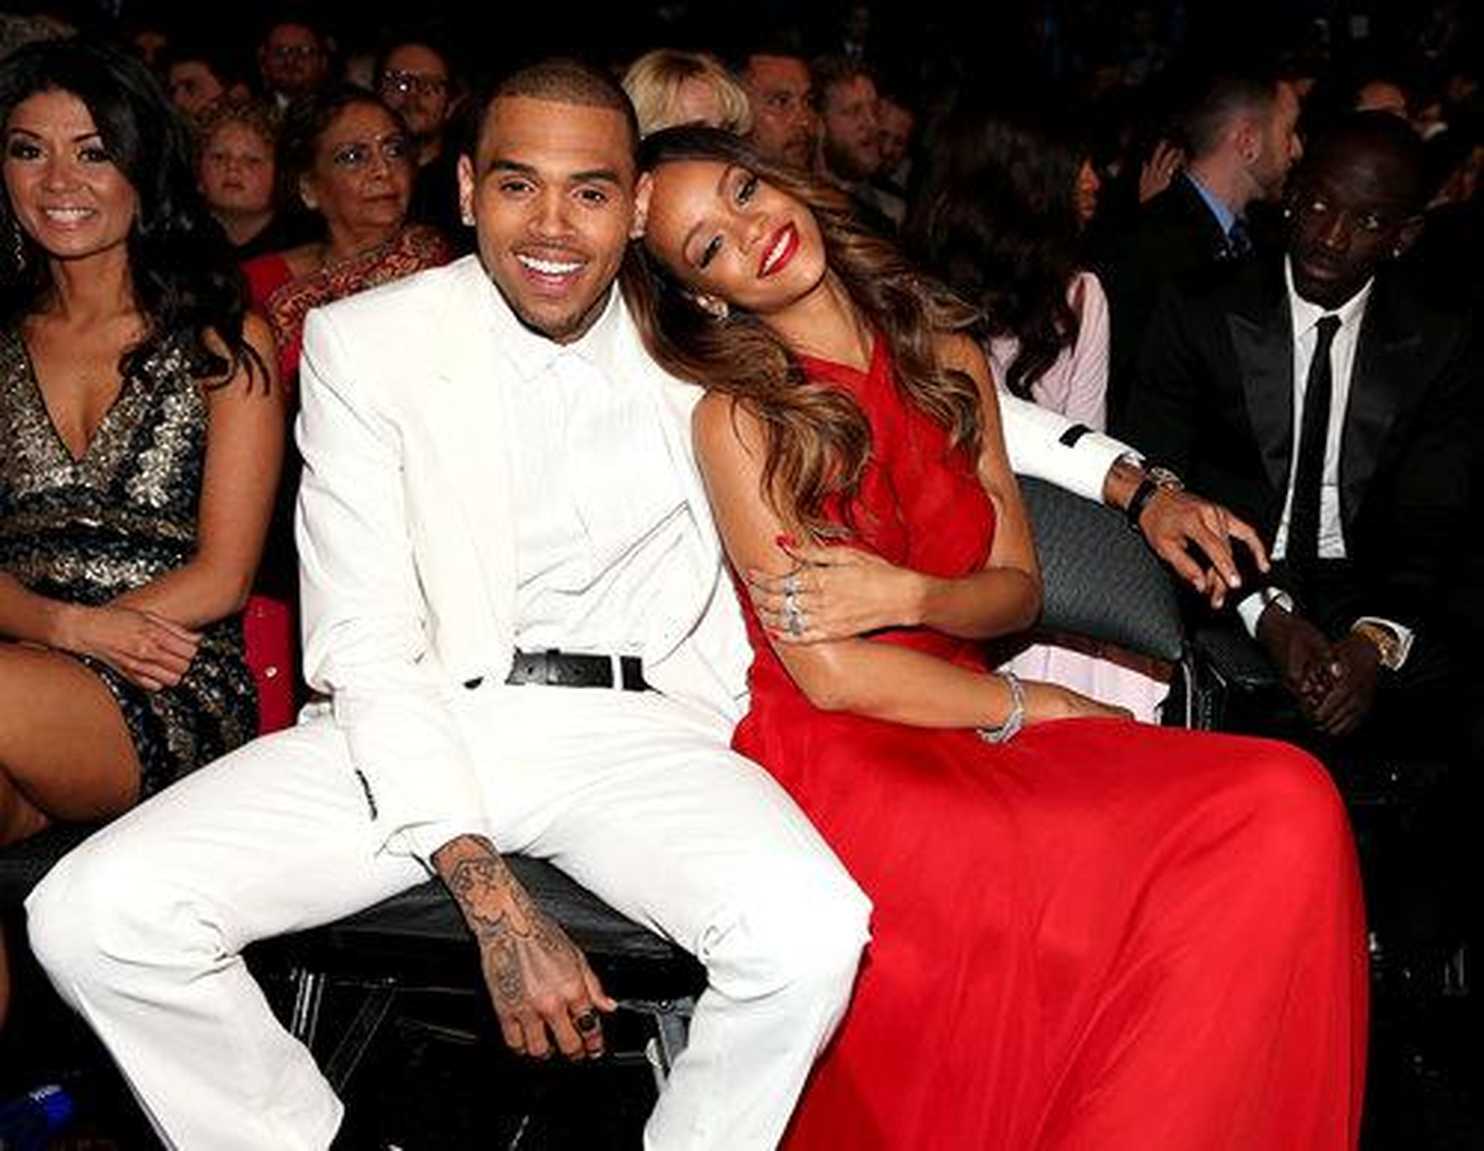 Chris Brown Finally Reveals His Side Of The Story That Lead To His Break Up With Rihanna